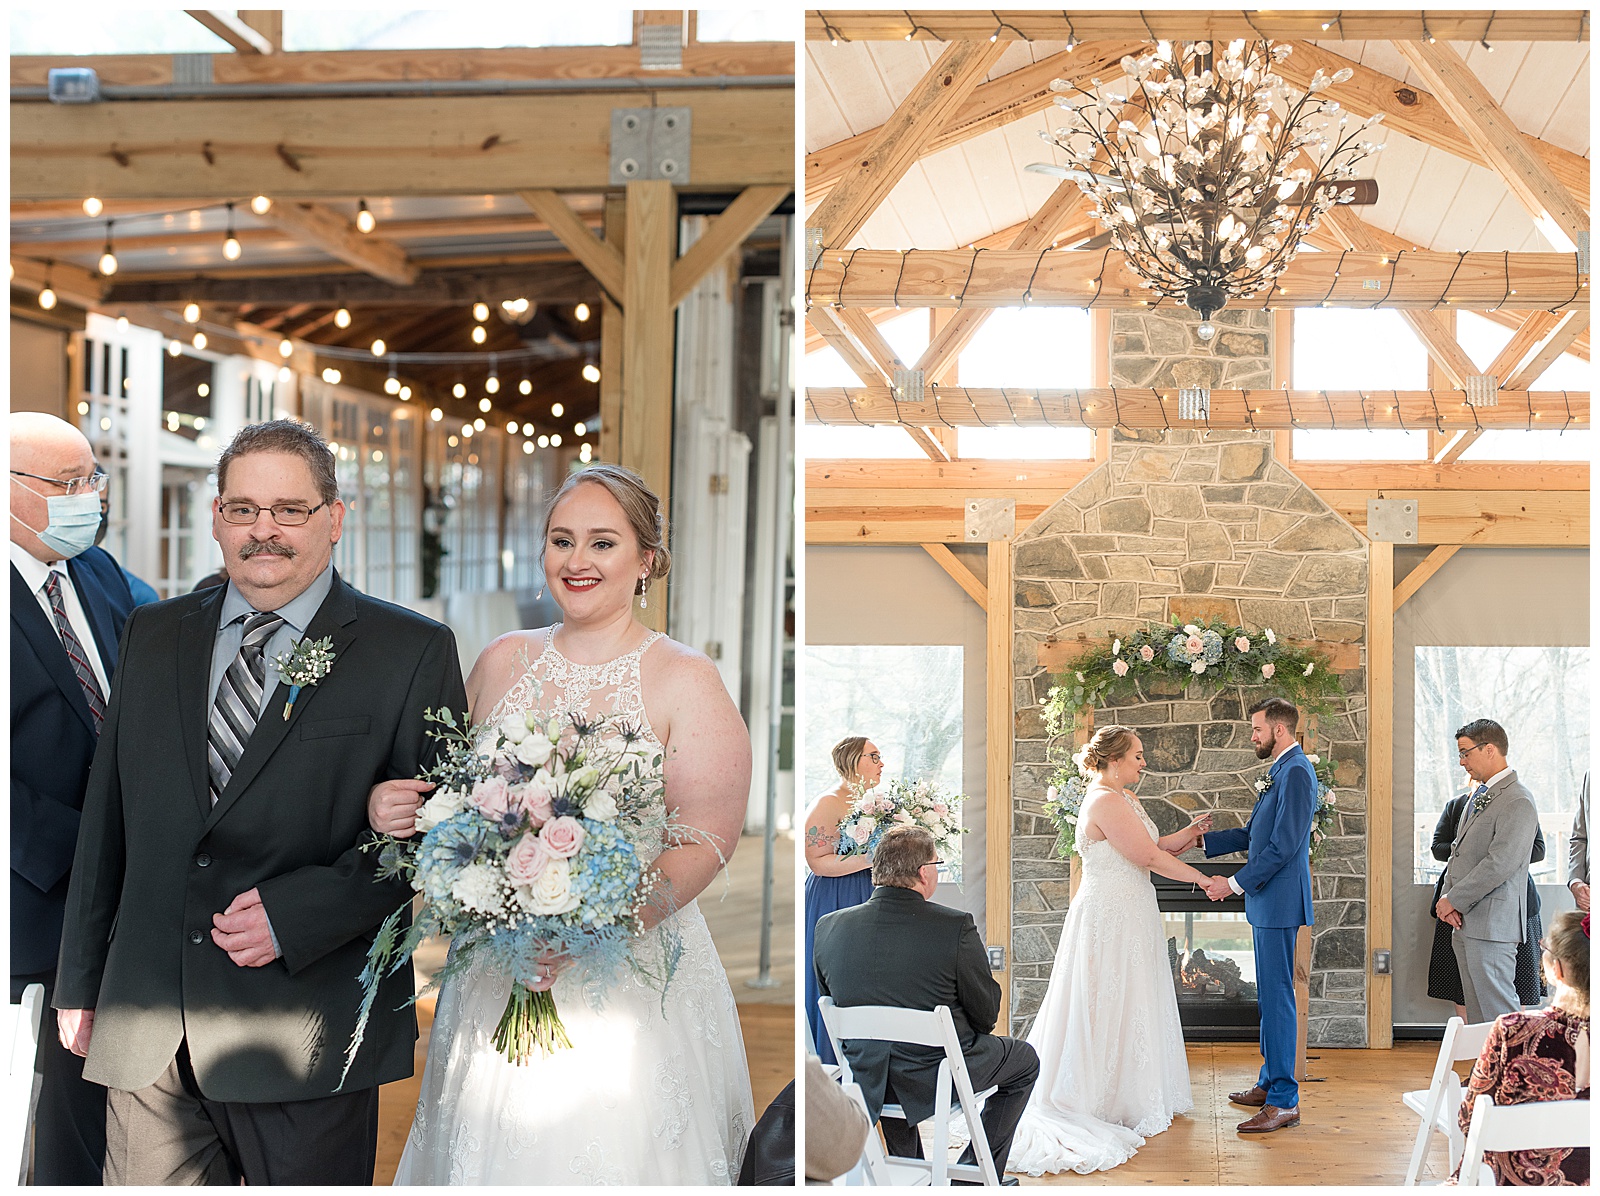 father of the bride walks her down aisle to groom by stone fireplace